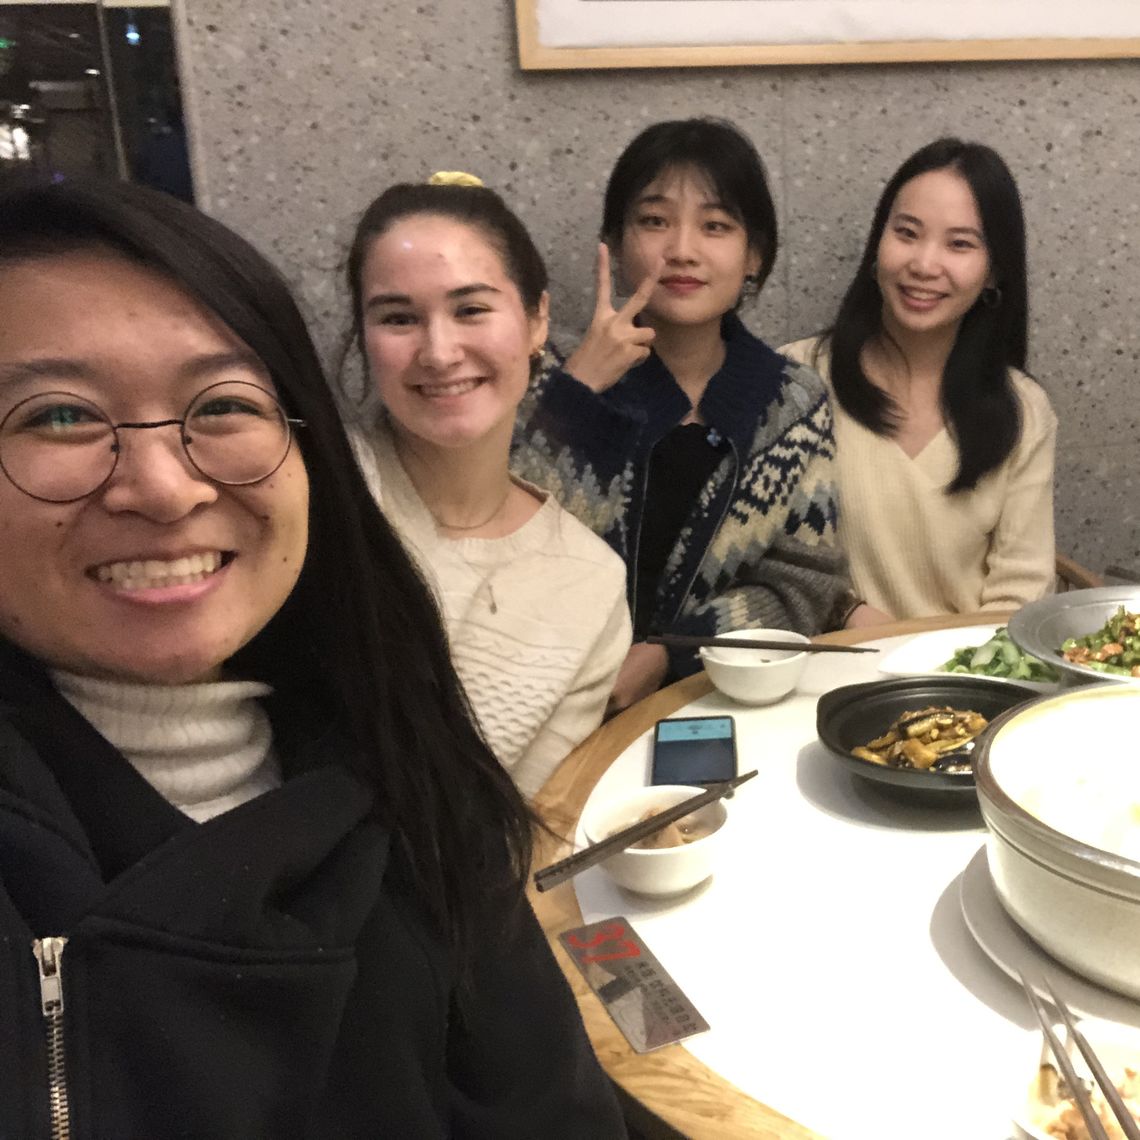 Dinner in Wuhan with friends, including Amy, a Hong Kong Princeton in Asia Fellow, and Polly and Tanila, two upperclassmen at Wuhan University of Technology.